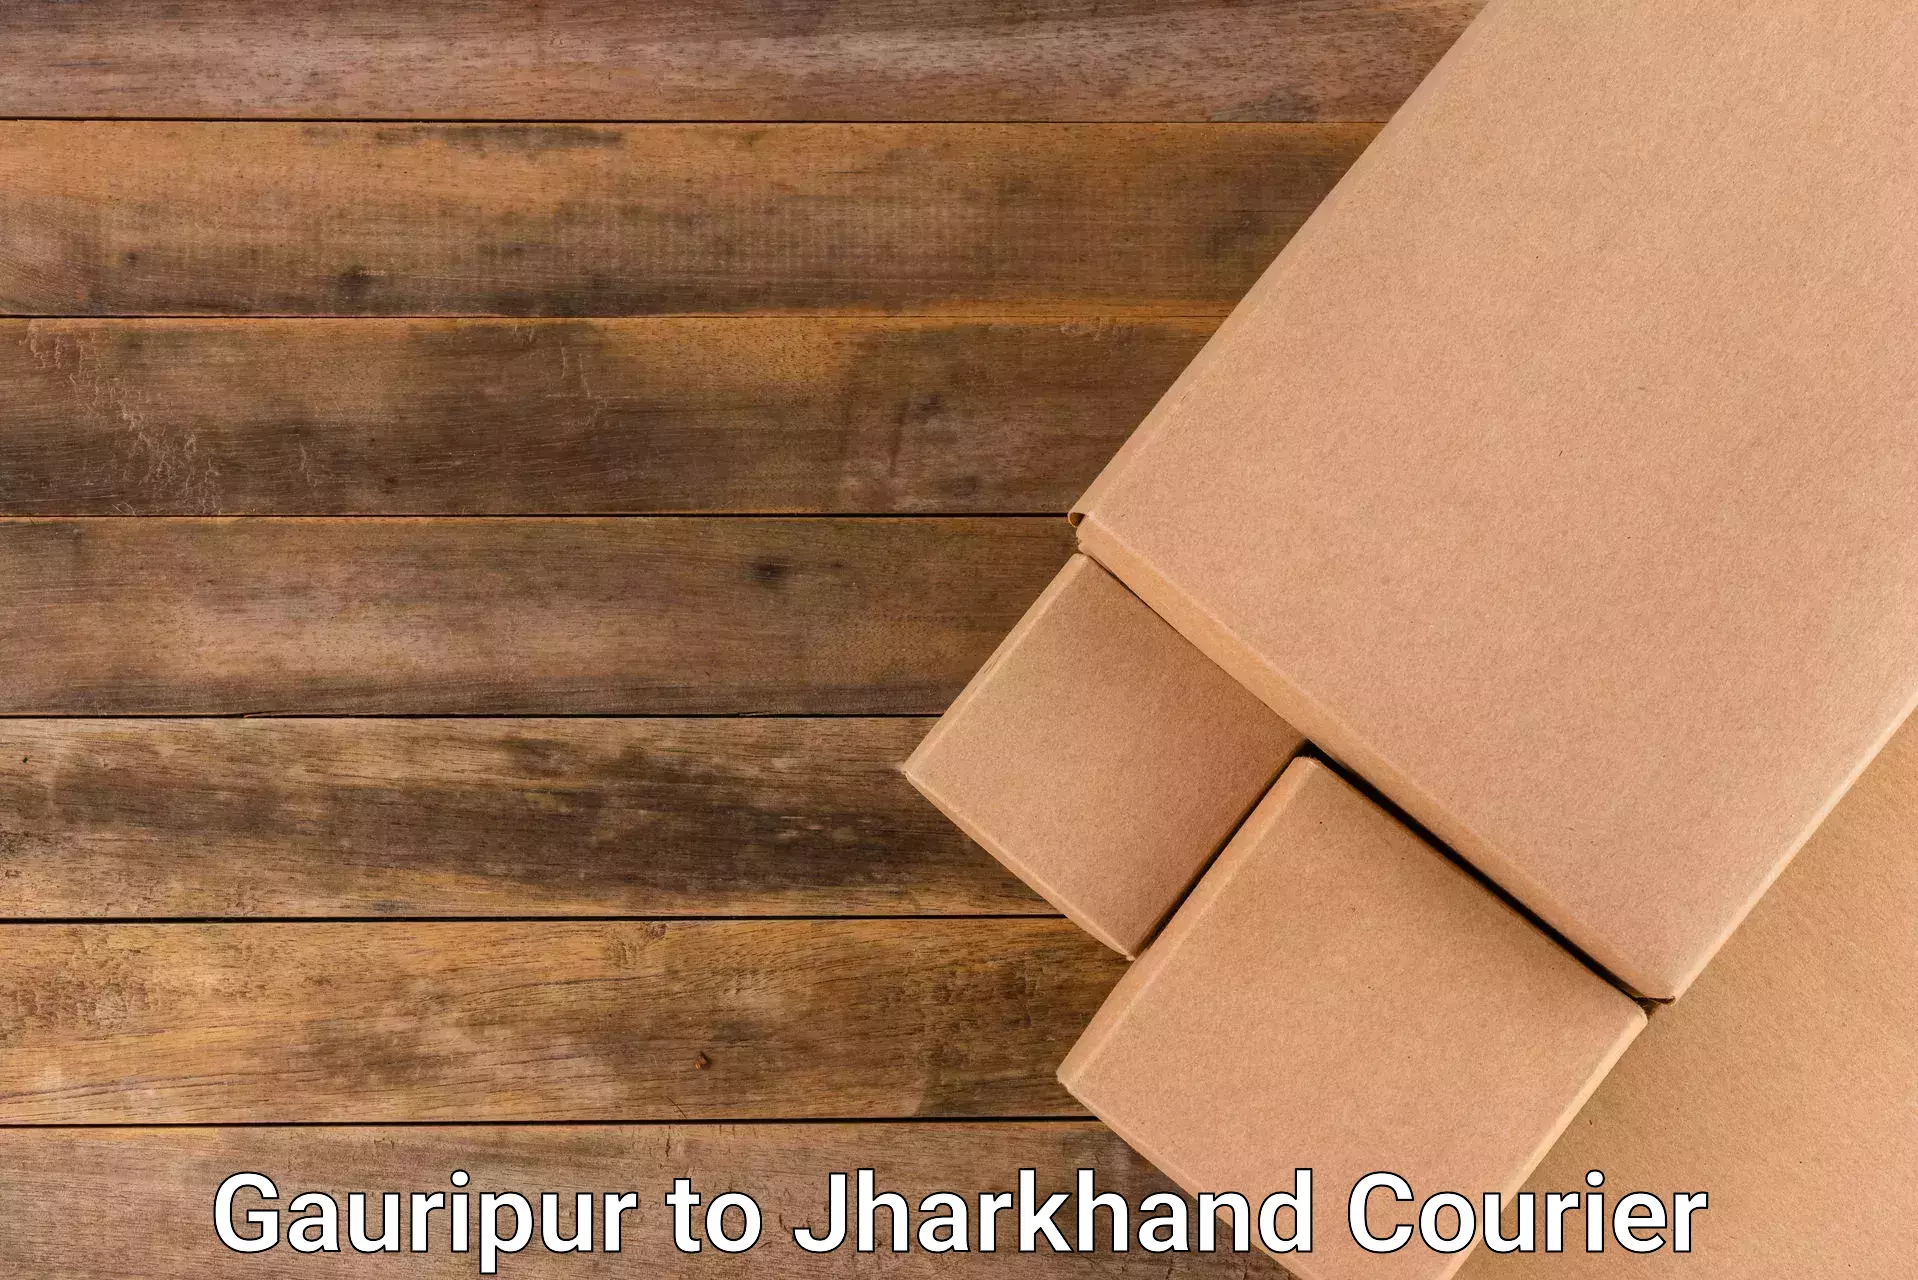 Air courier services Gauripur to Hazaribagh